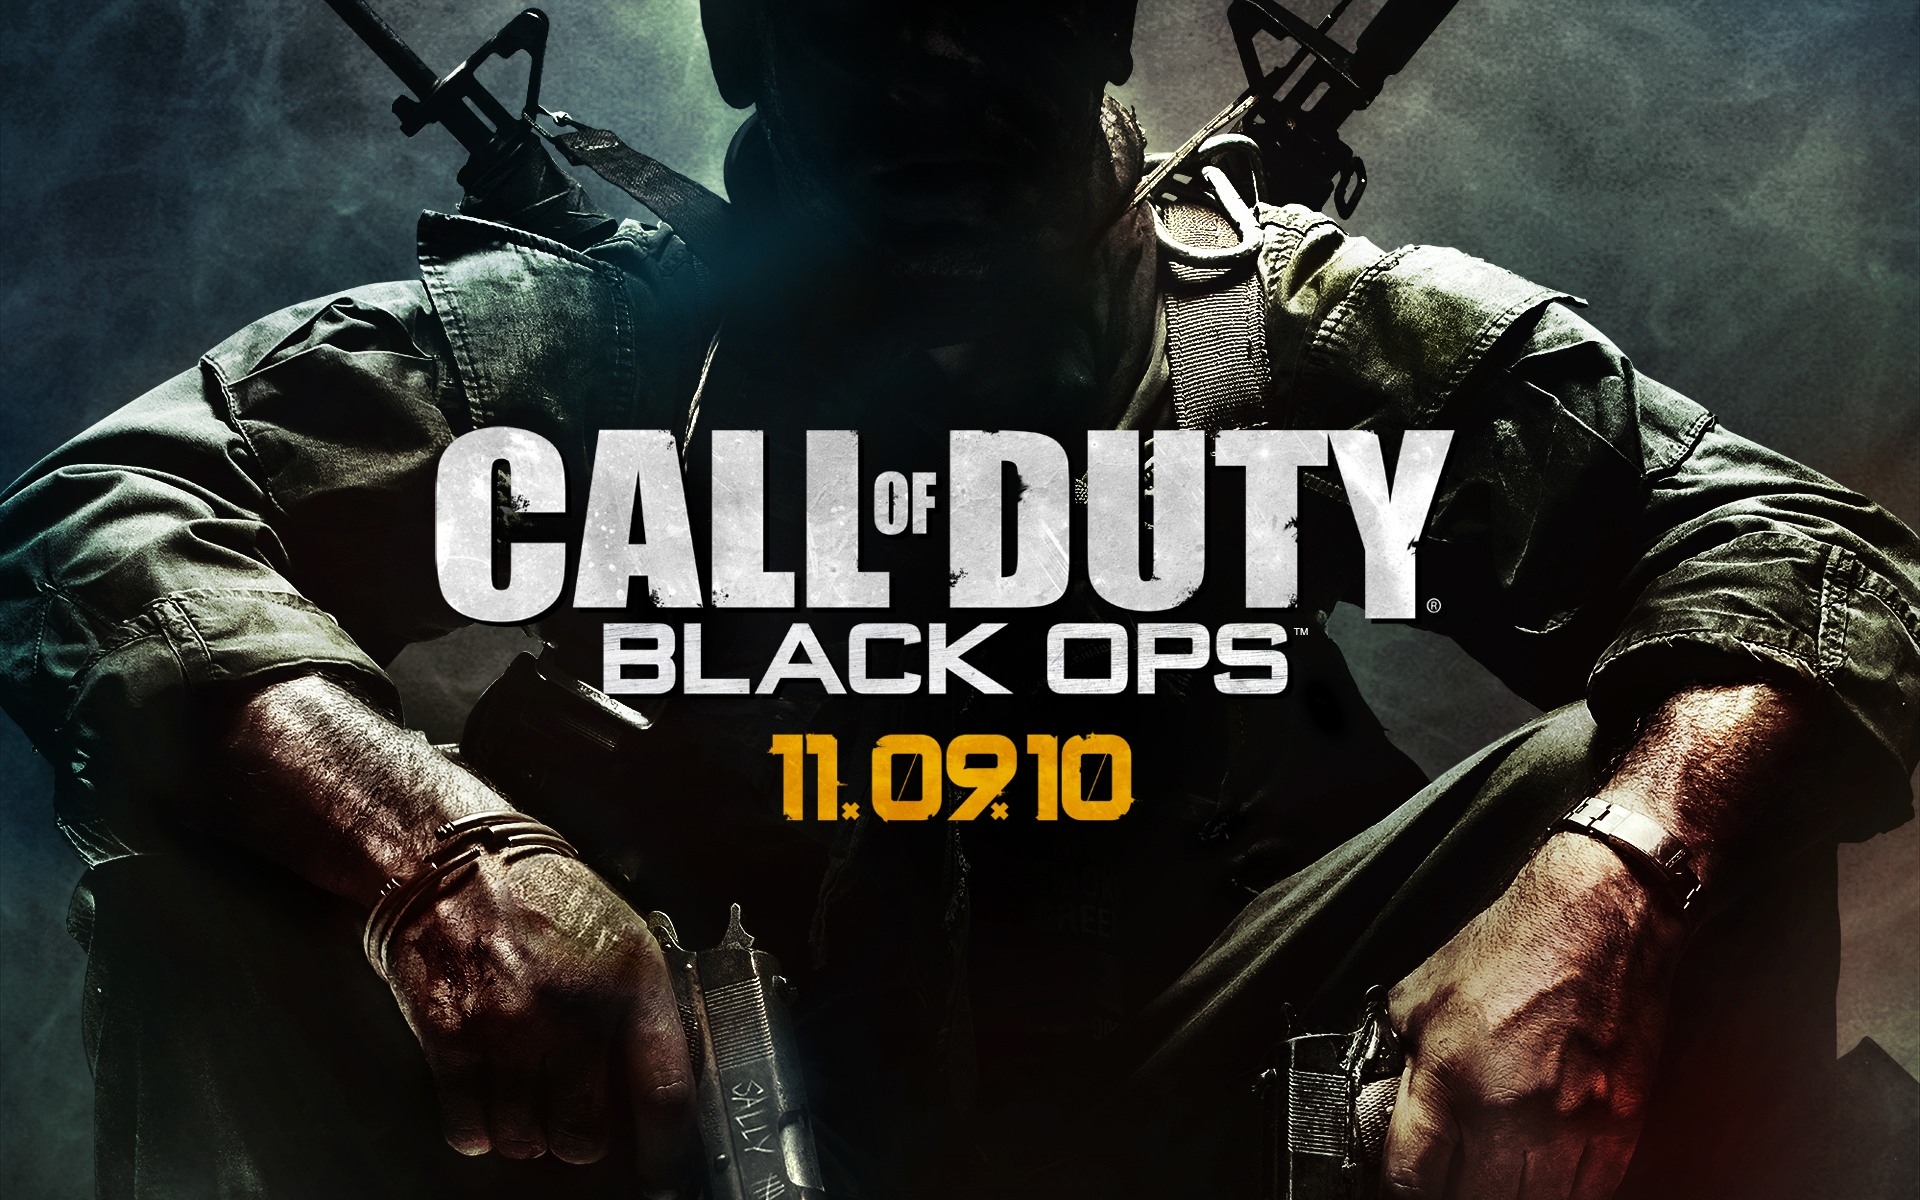  of Duty Black OPS wallpapers Call of Duty Black OPS stock photos 1920x1200